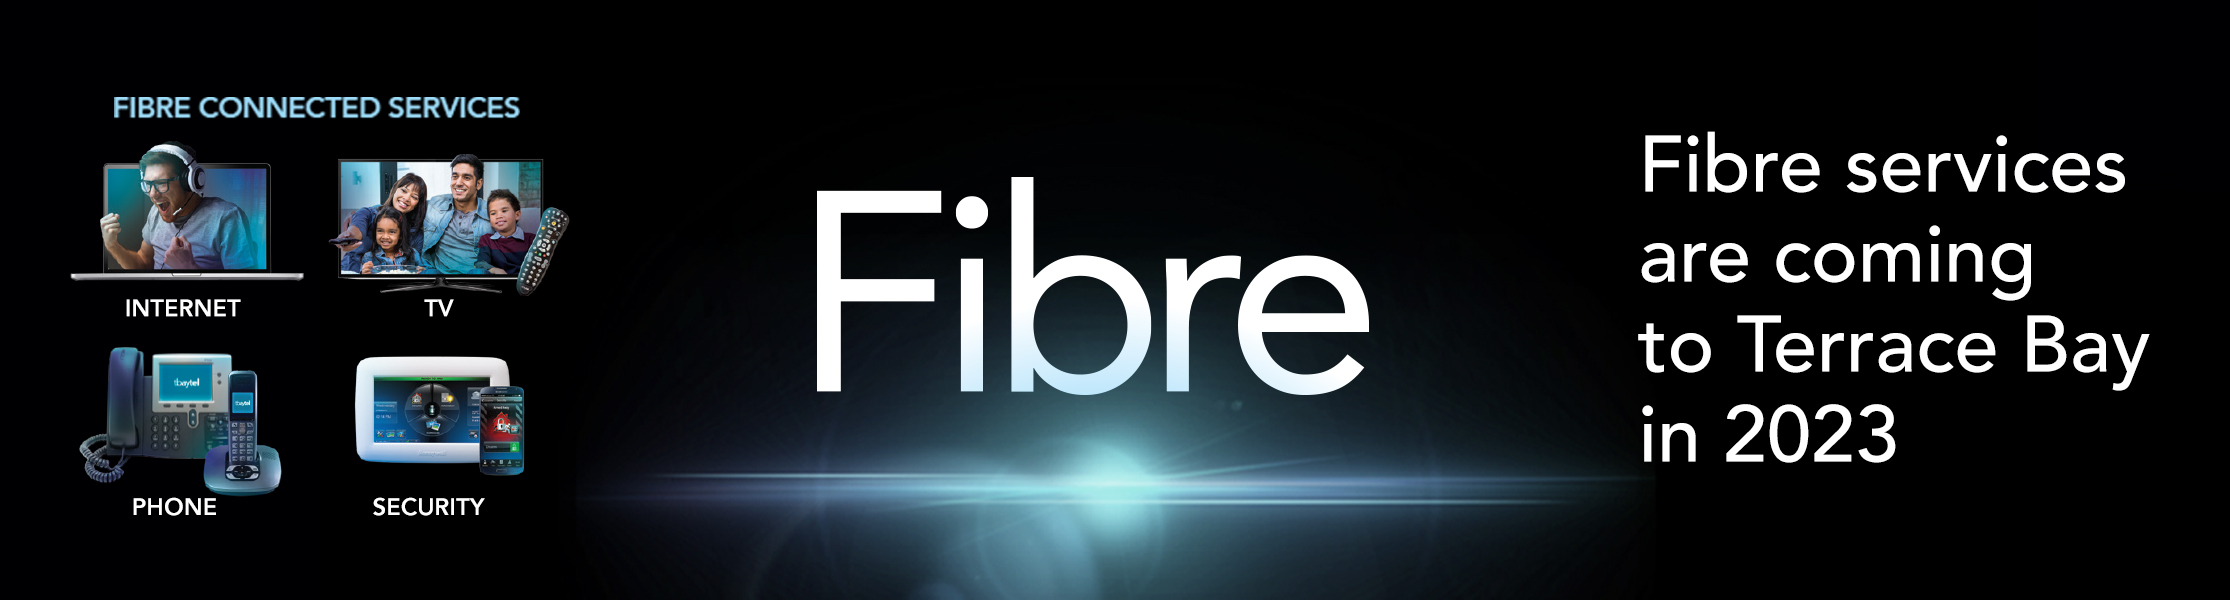 Fibre is coming to Terrace Bay